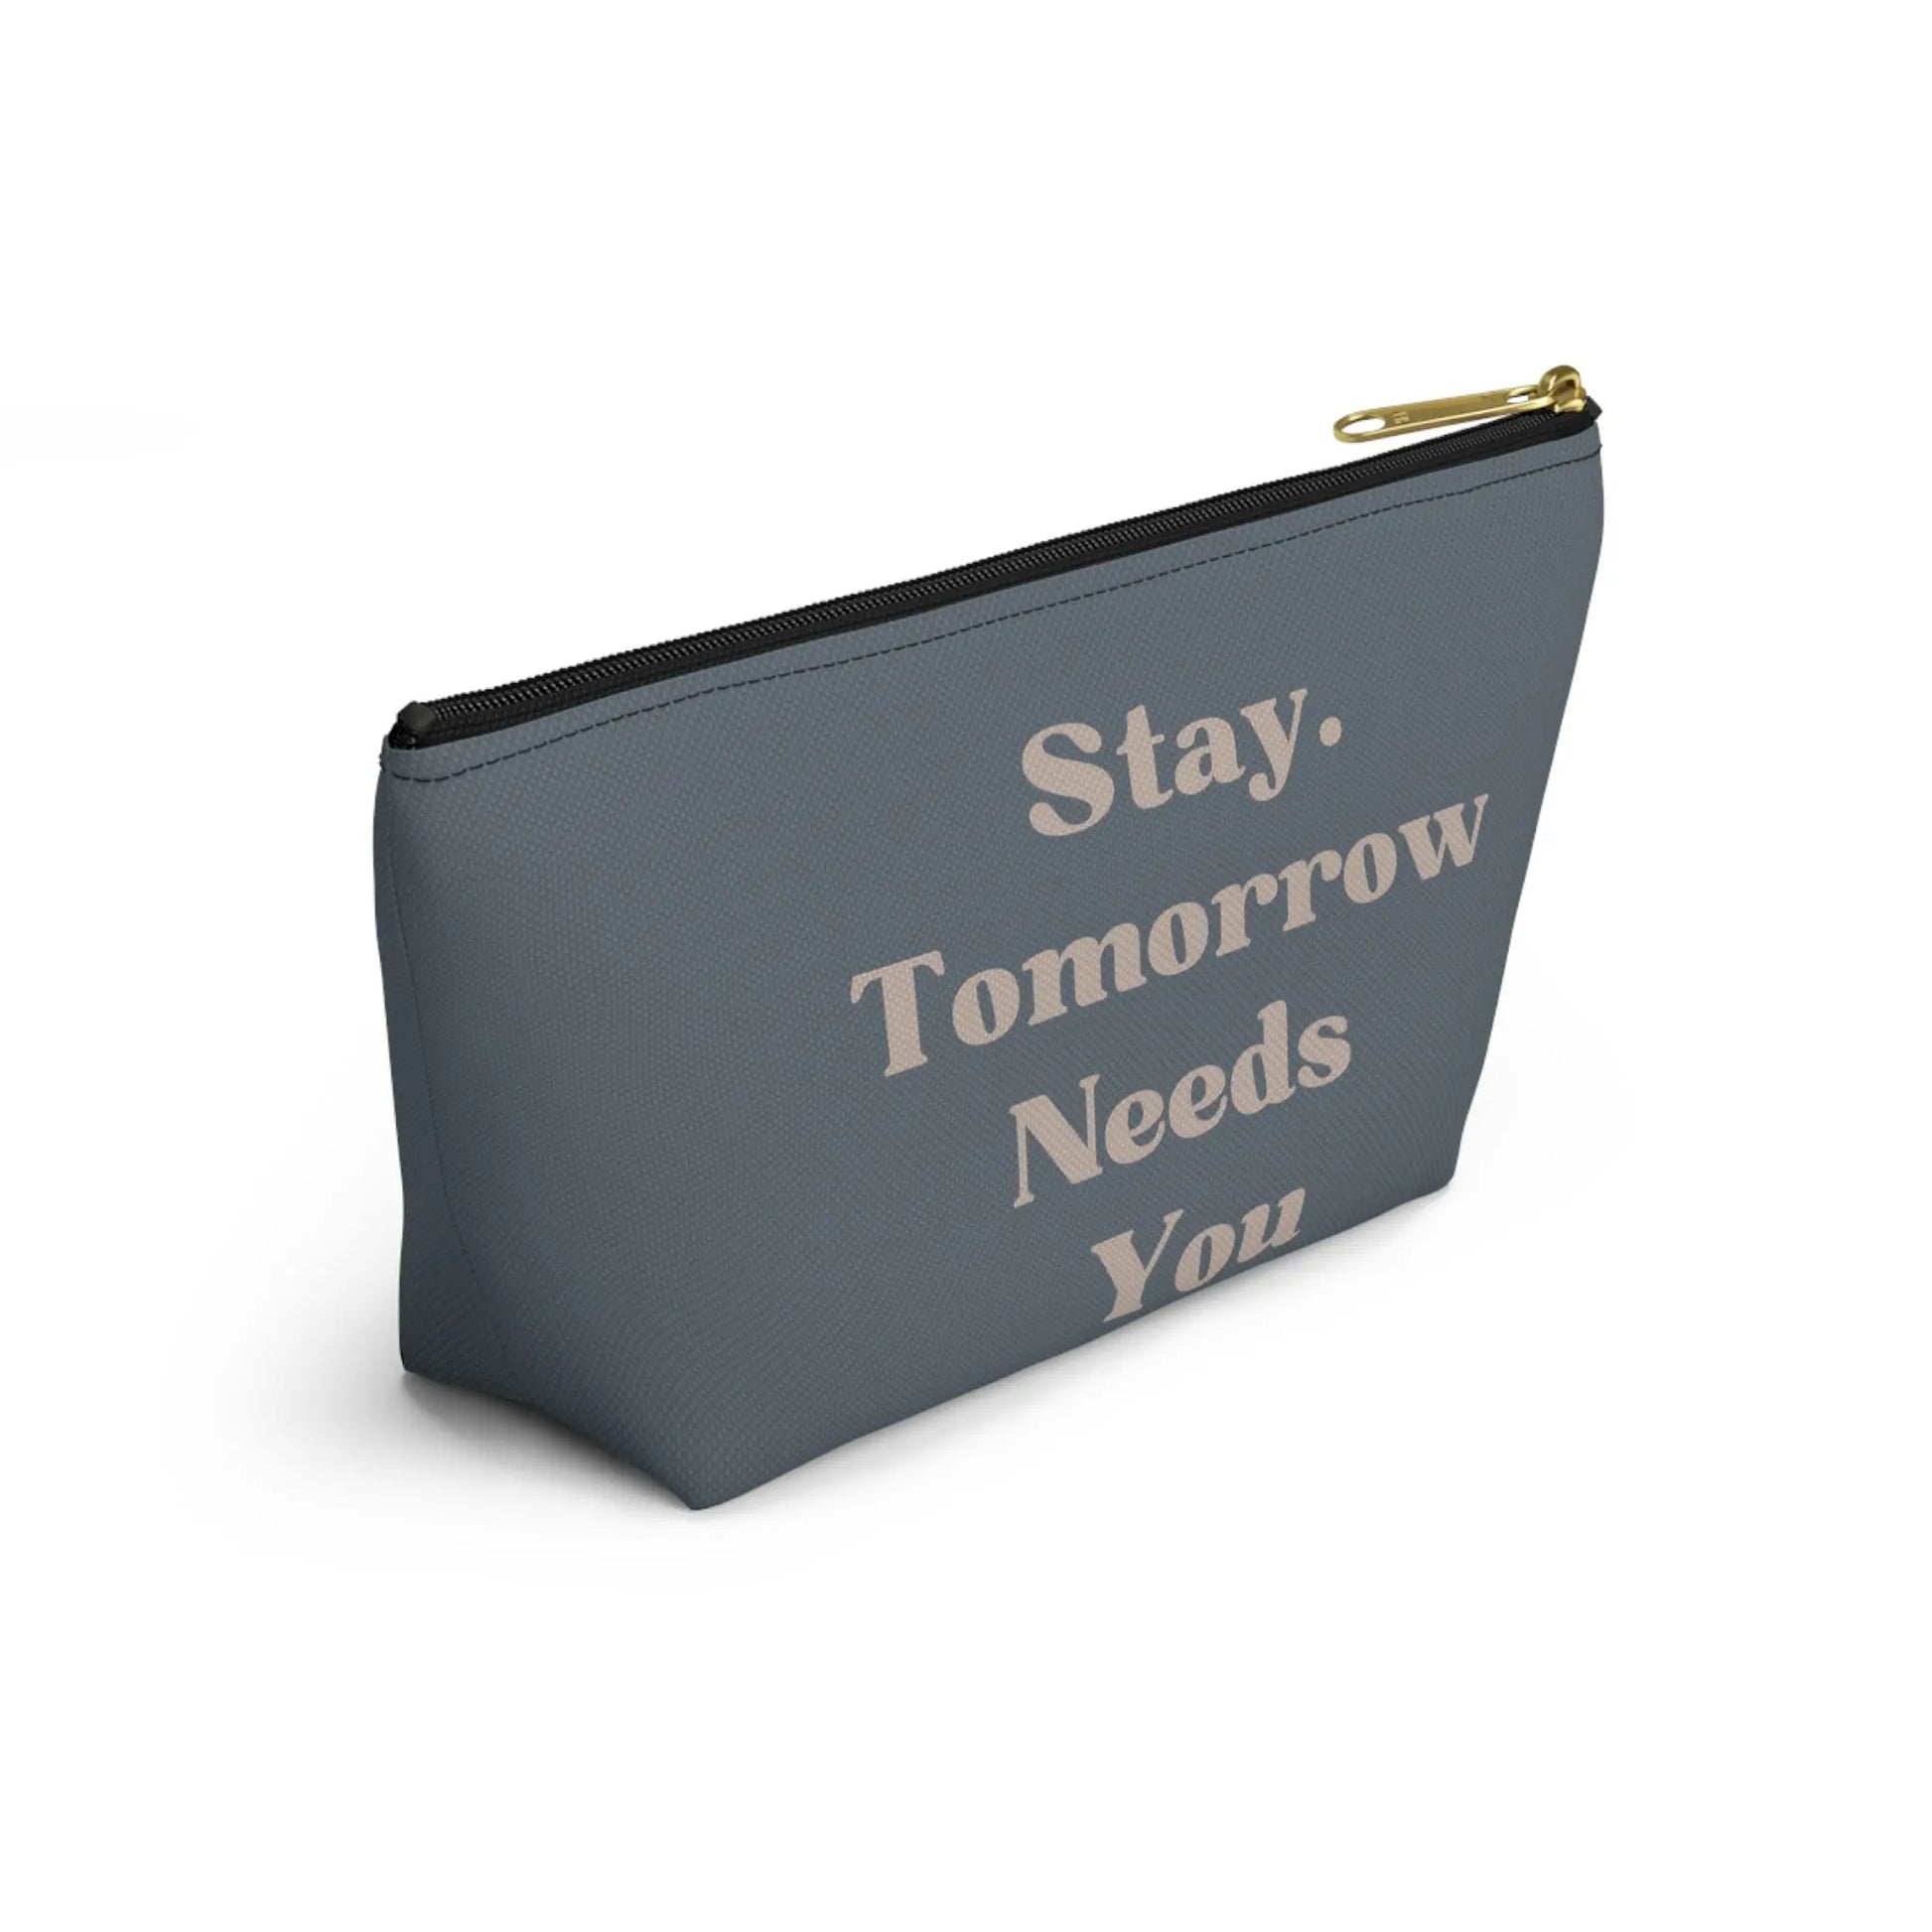 Stay Tomorrow Needs You Suicide Awareness Makeup Bag w T-bottom In custom Gray-Blue and Tan 2024